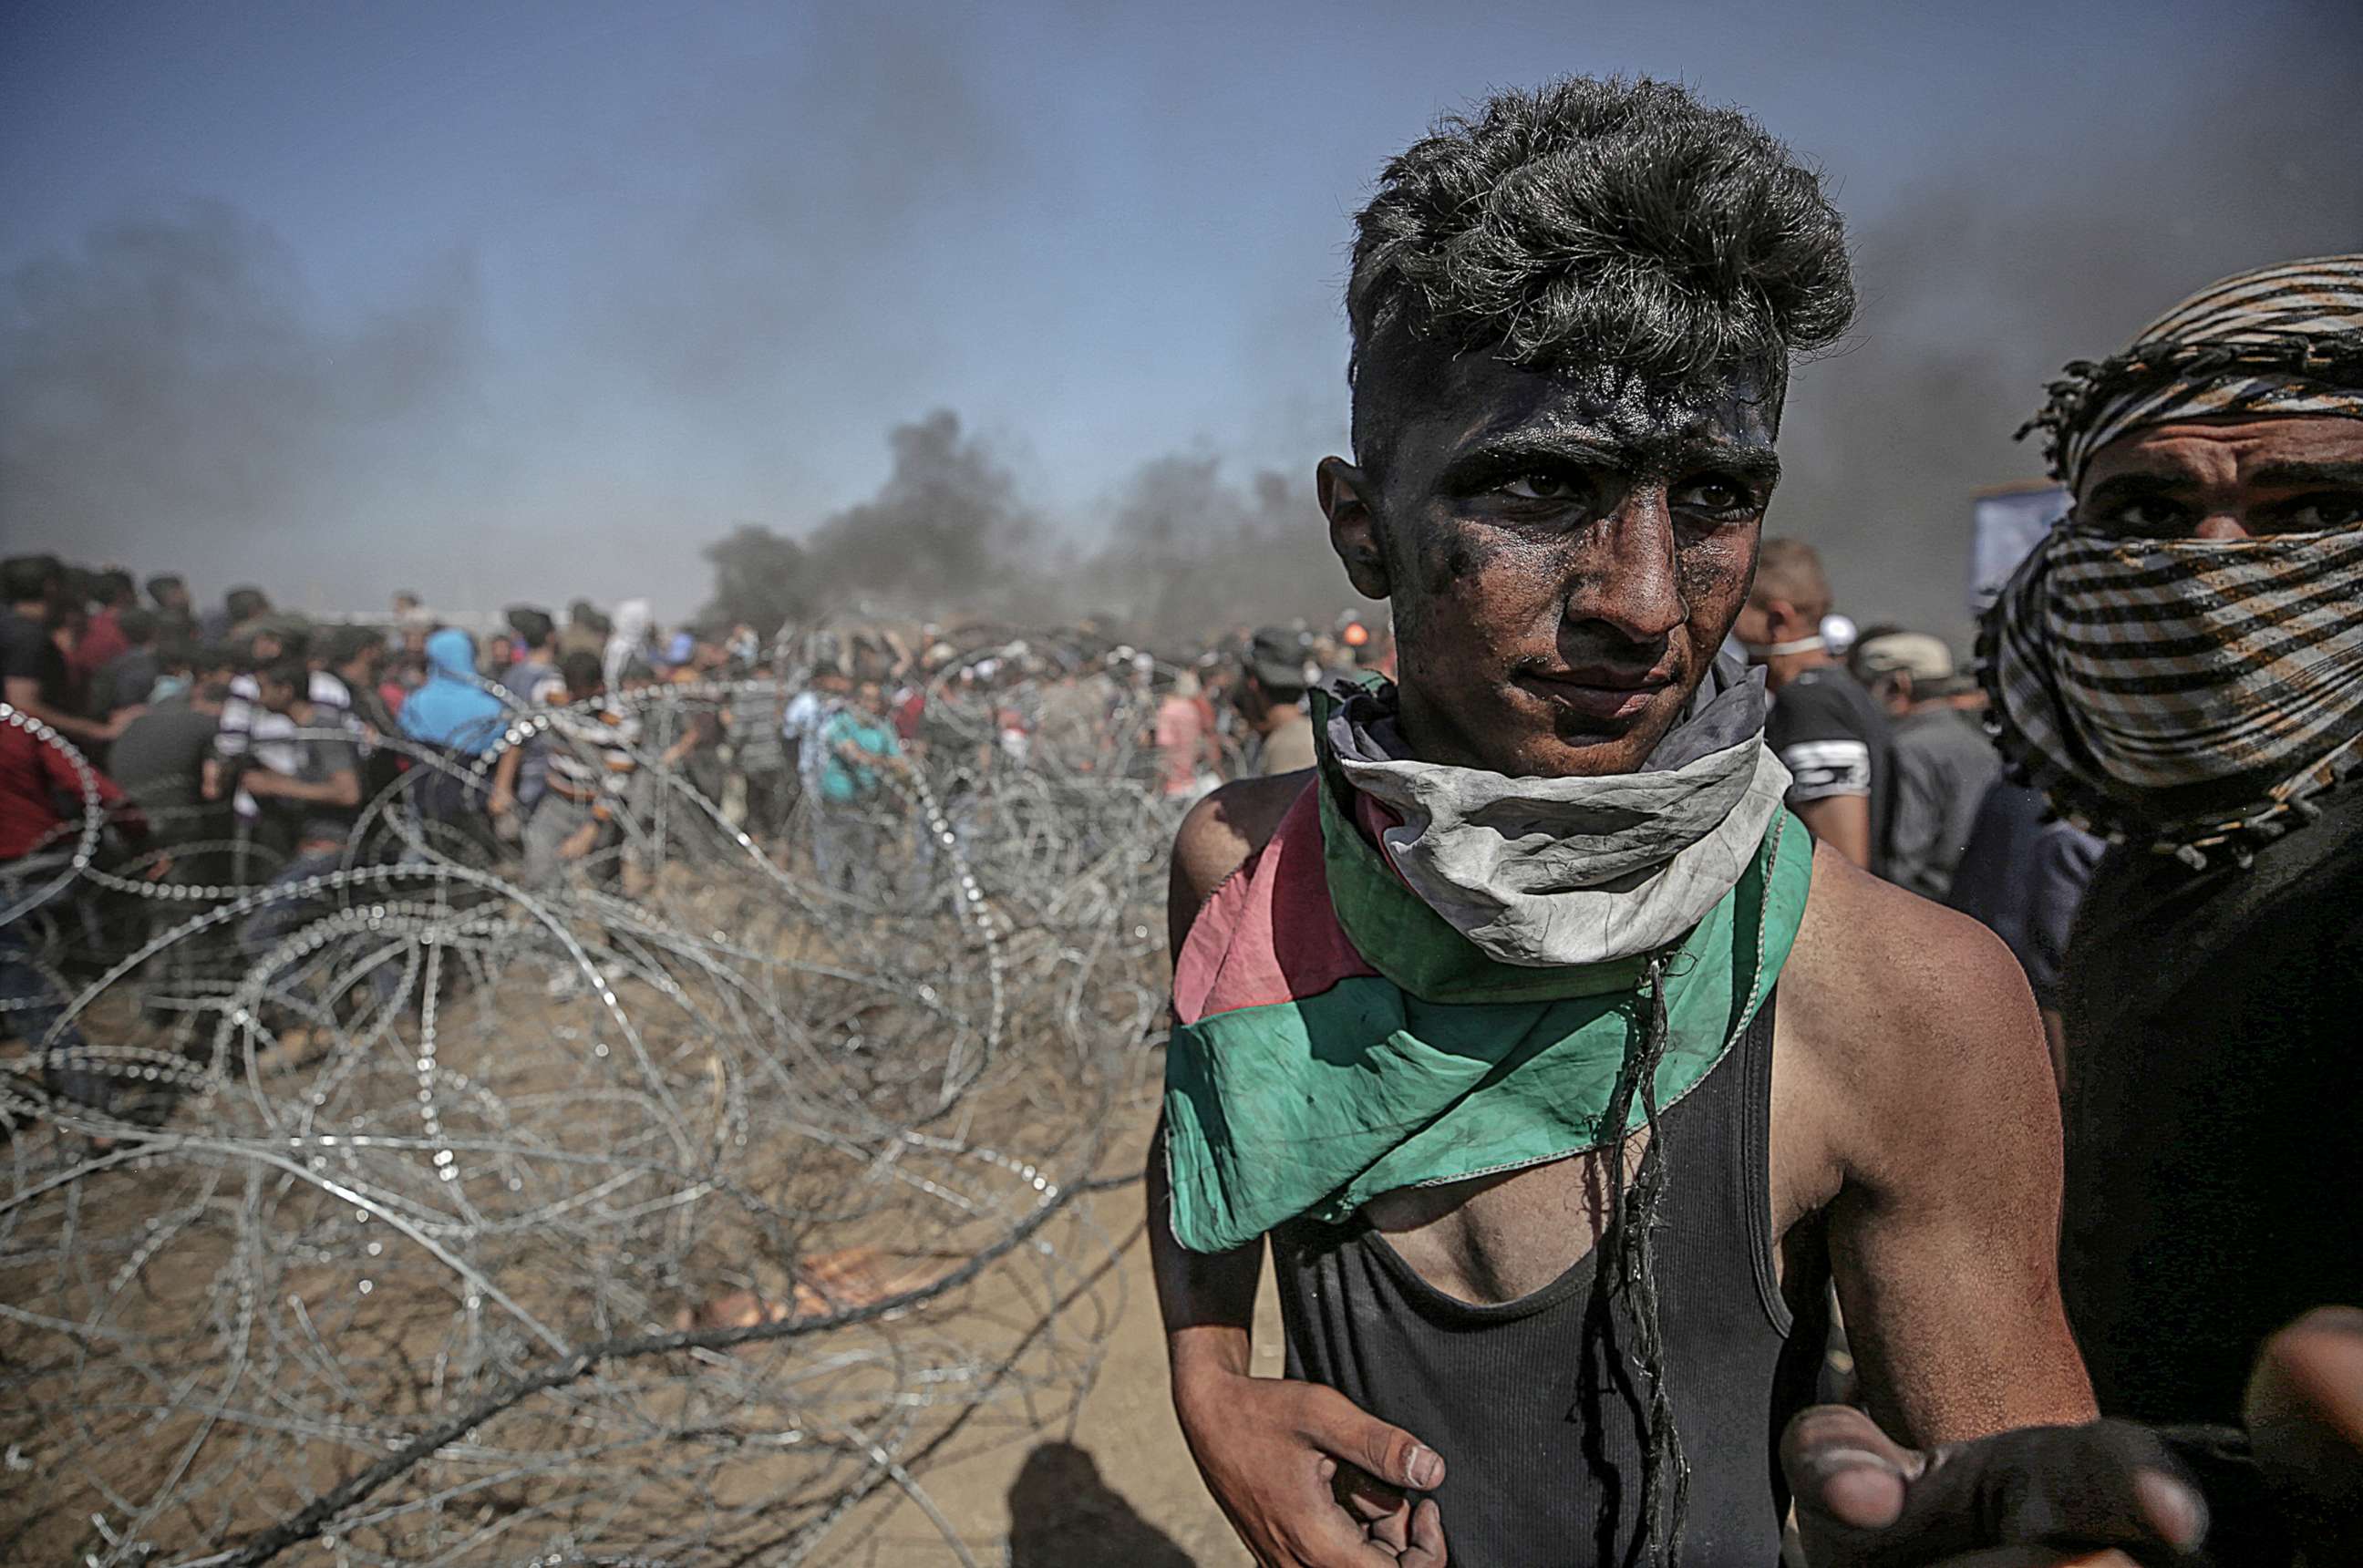 PHOTO: Palestinians protesters pull barbed wire fence installed by Israeli army along the border during clashes after protests near the border with Israel in the east of Gaza Strip, May 14, 2018.